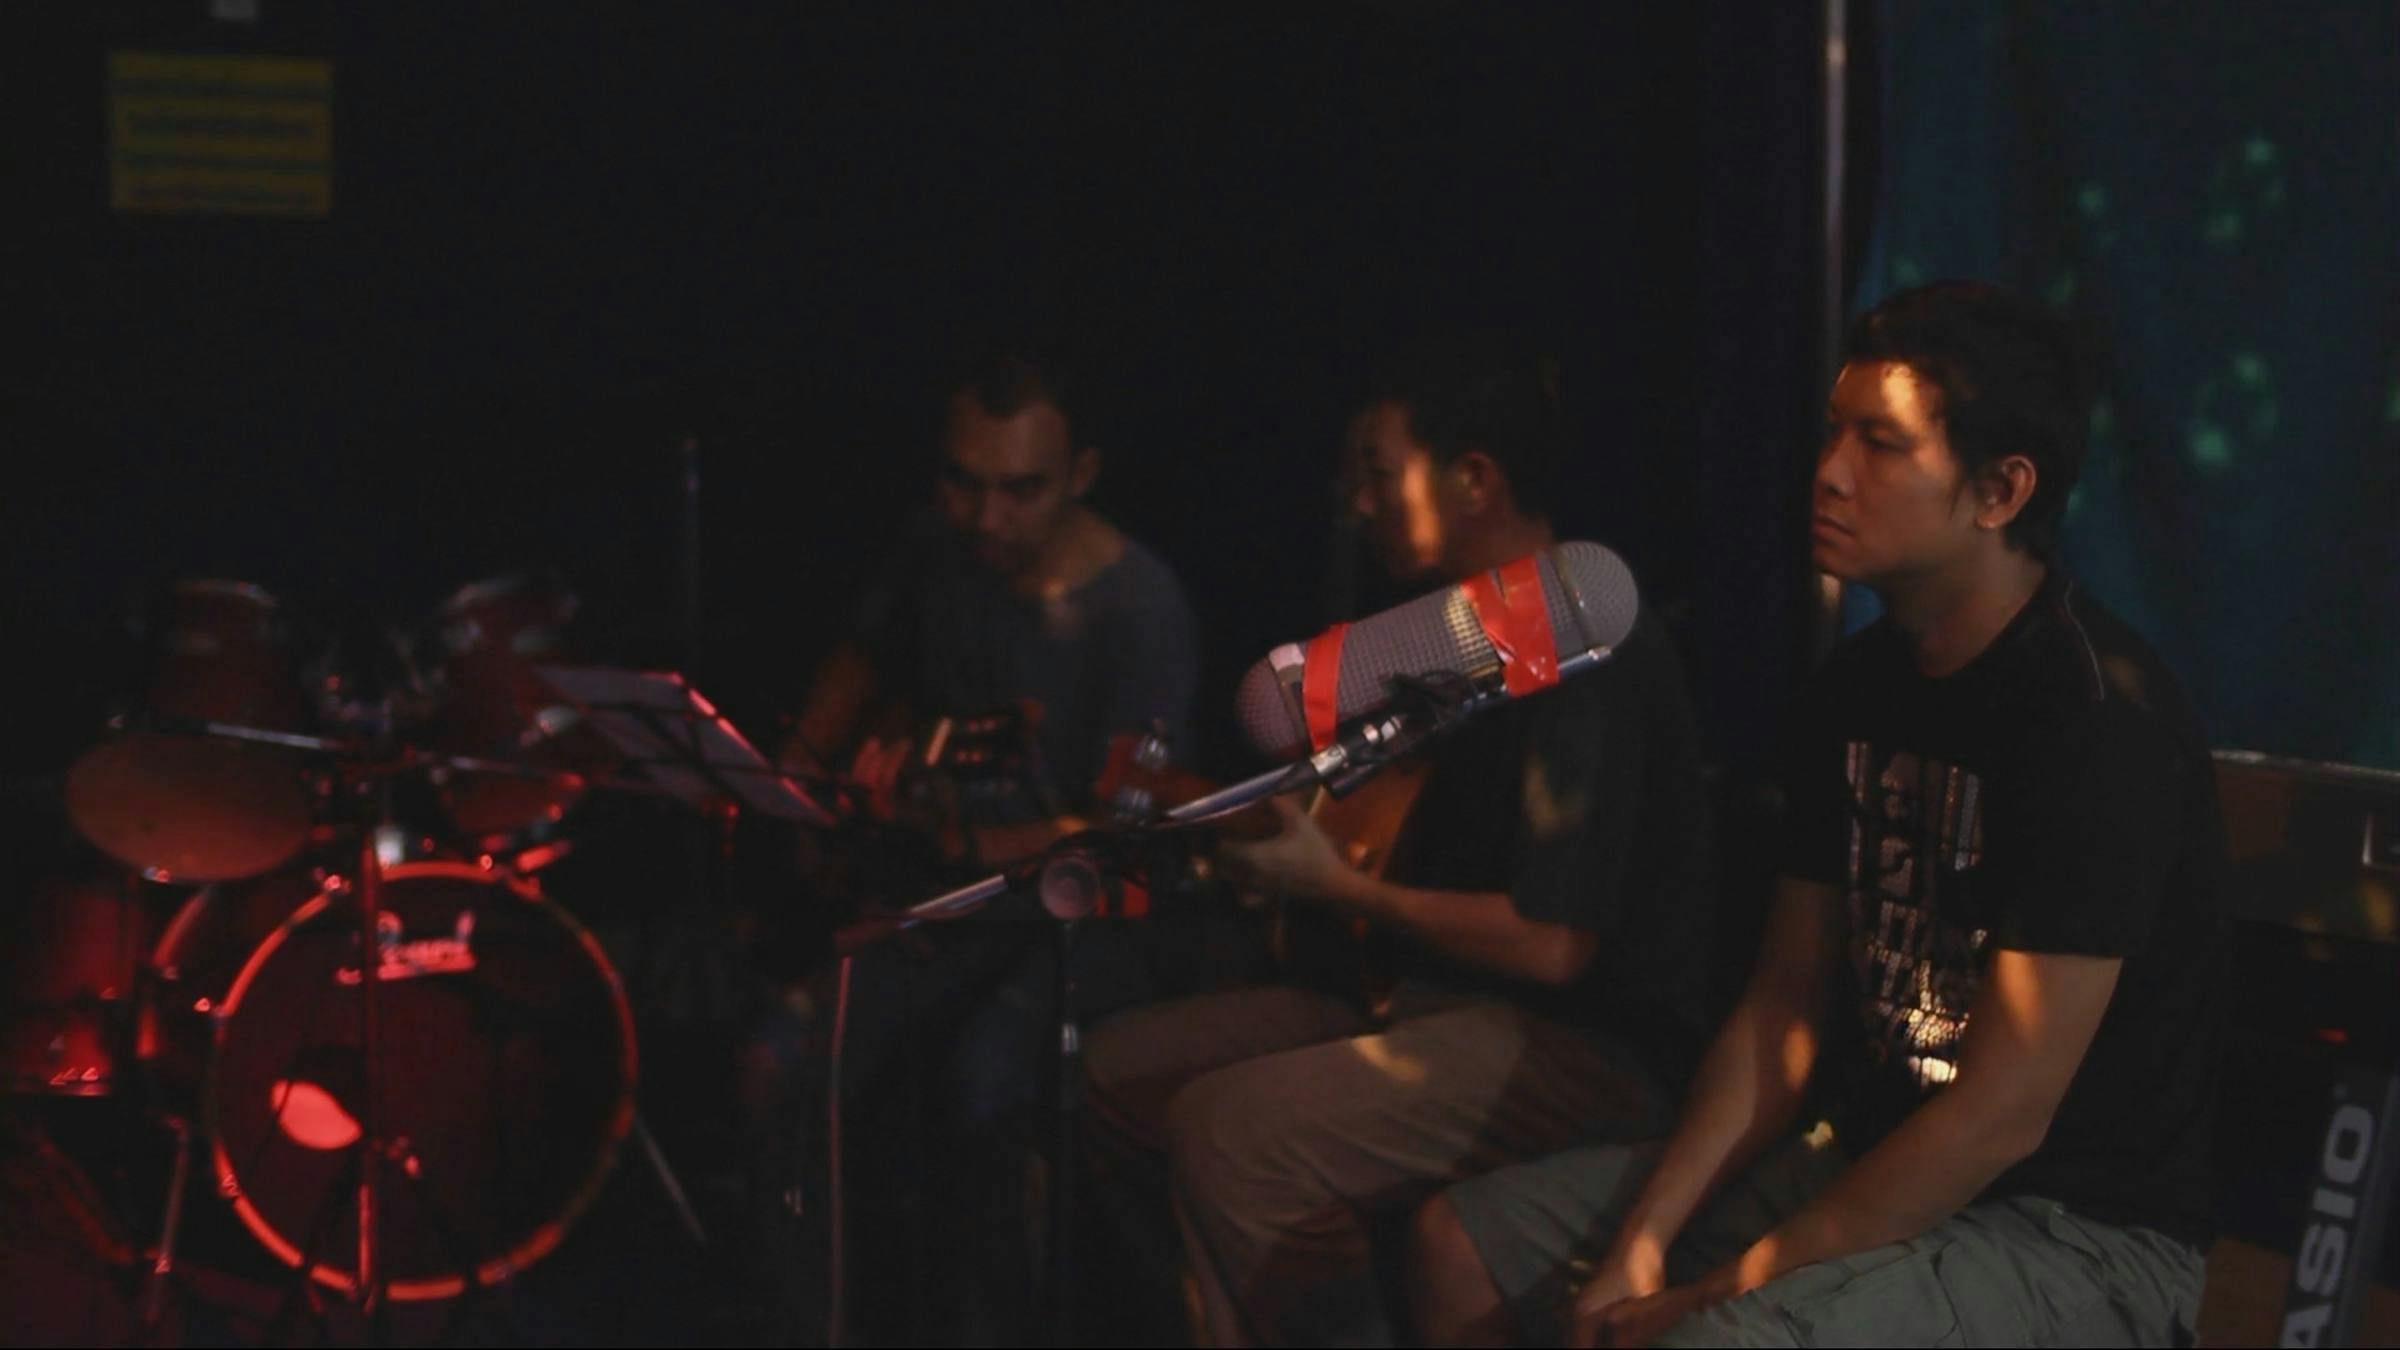 the artist is sitting in a room that is green and in front of a very large microphone. There is a person sitting to his right. The room feels as though the people in the image might be playing to a live audience